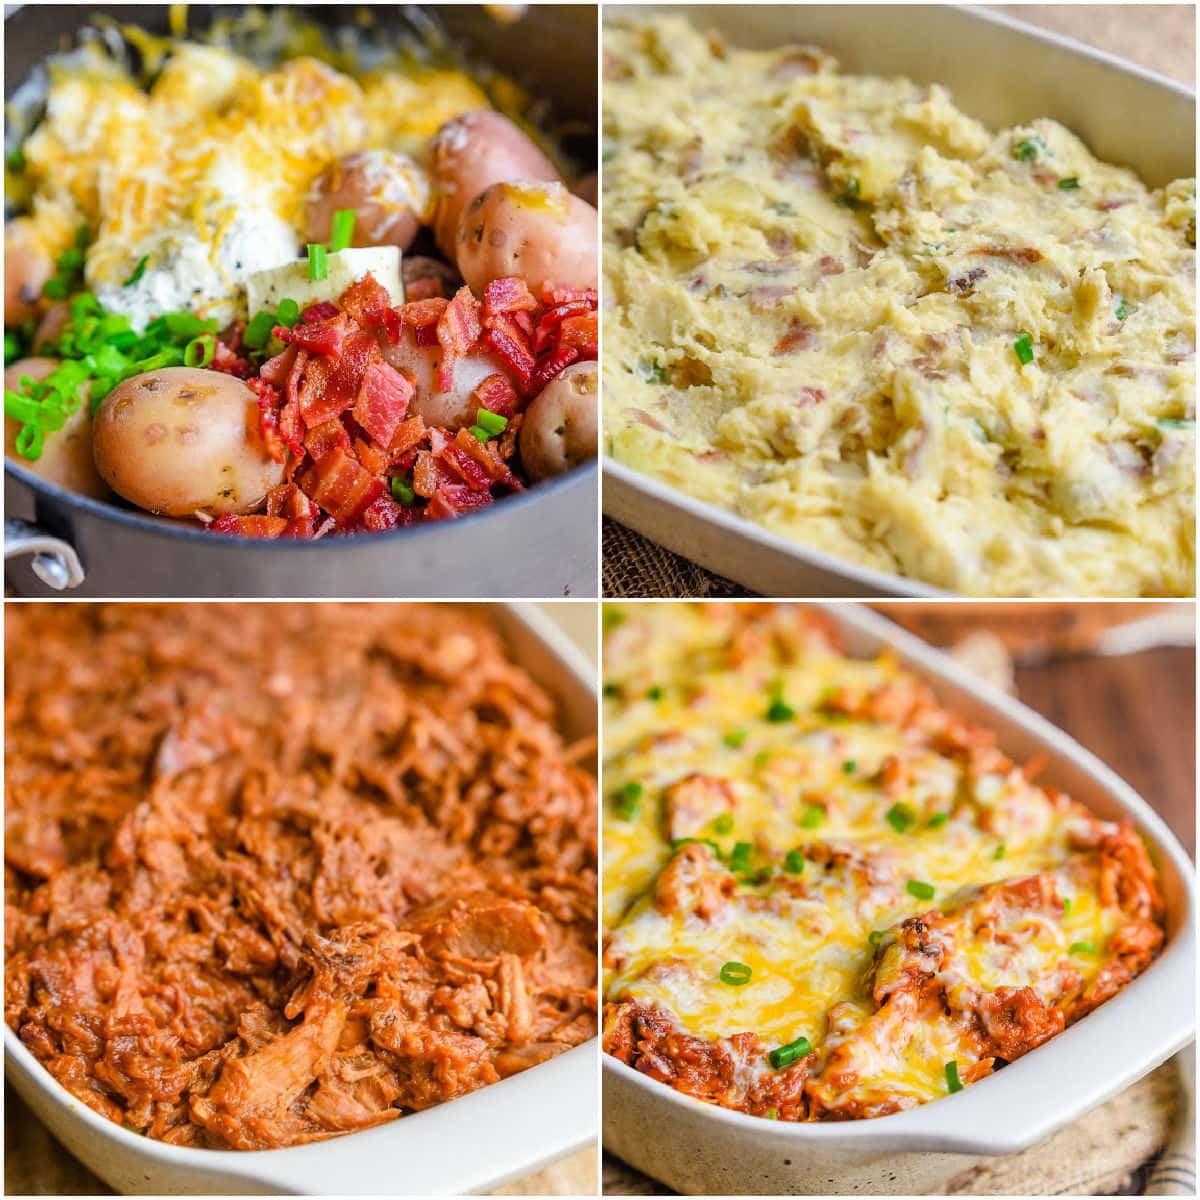 four image collage showing how to make pulled pork mashed potato casserole step by step.